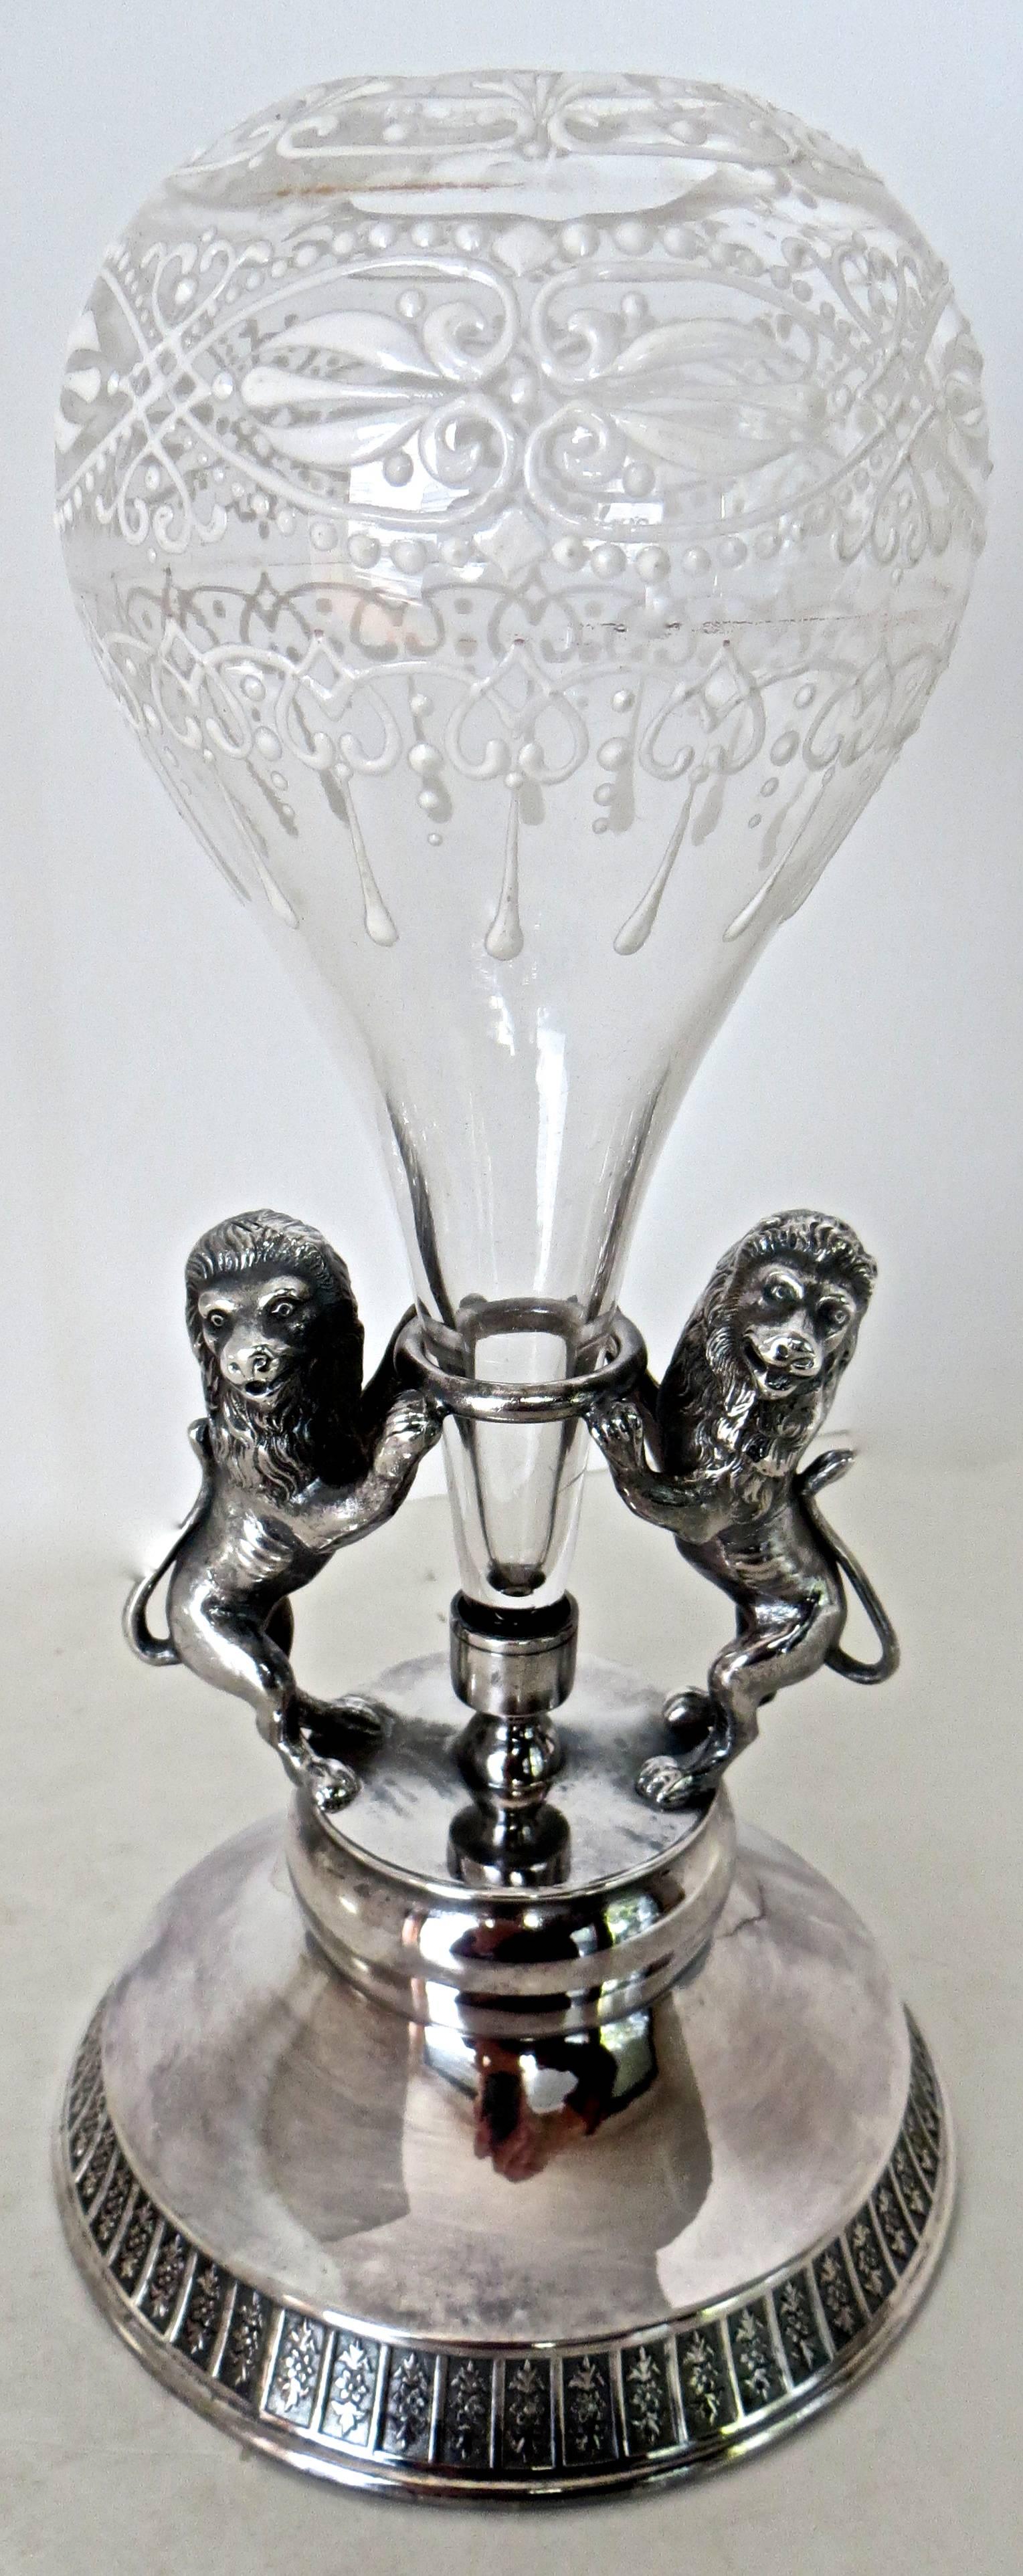 Late 19th Century Pair of Passant Lions with Hot Air Balloon, Silver Plate Epergne, Meriden For Sale